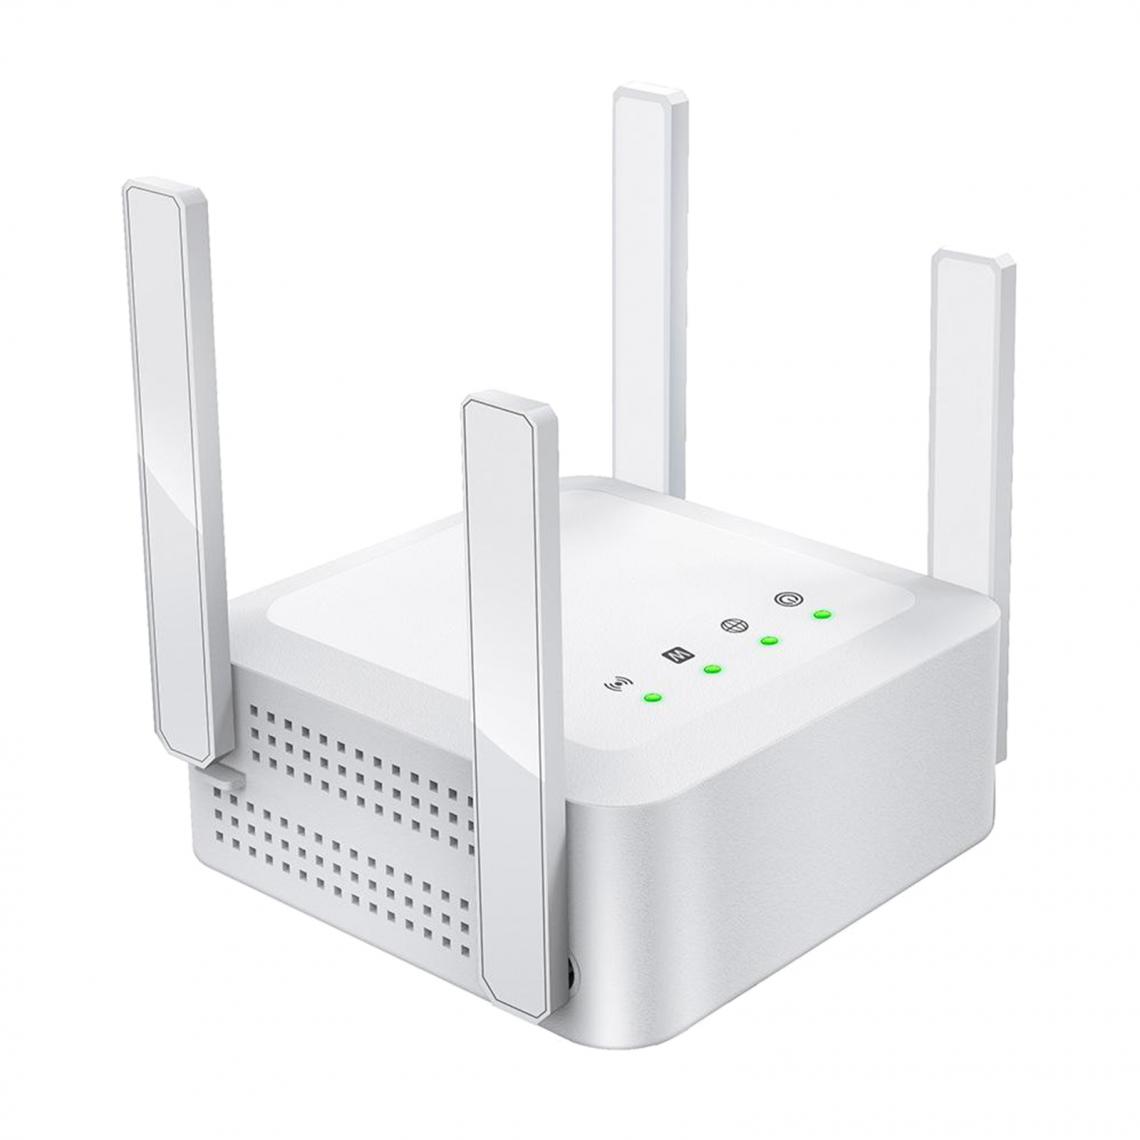 marque generique - Booster WiFi 1200 Mbps Double Bande Vers Alex Devices 360 Full Coverage Prise Américaine - Antenne WiFi